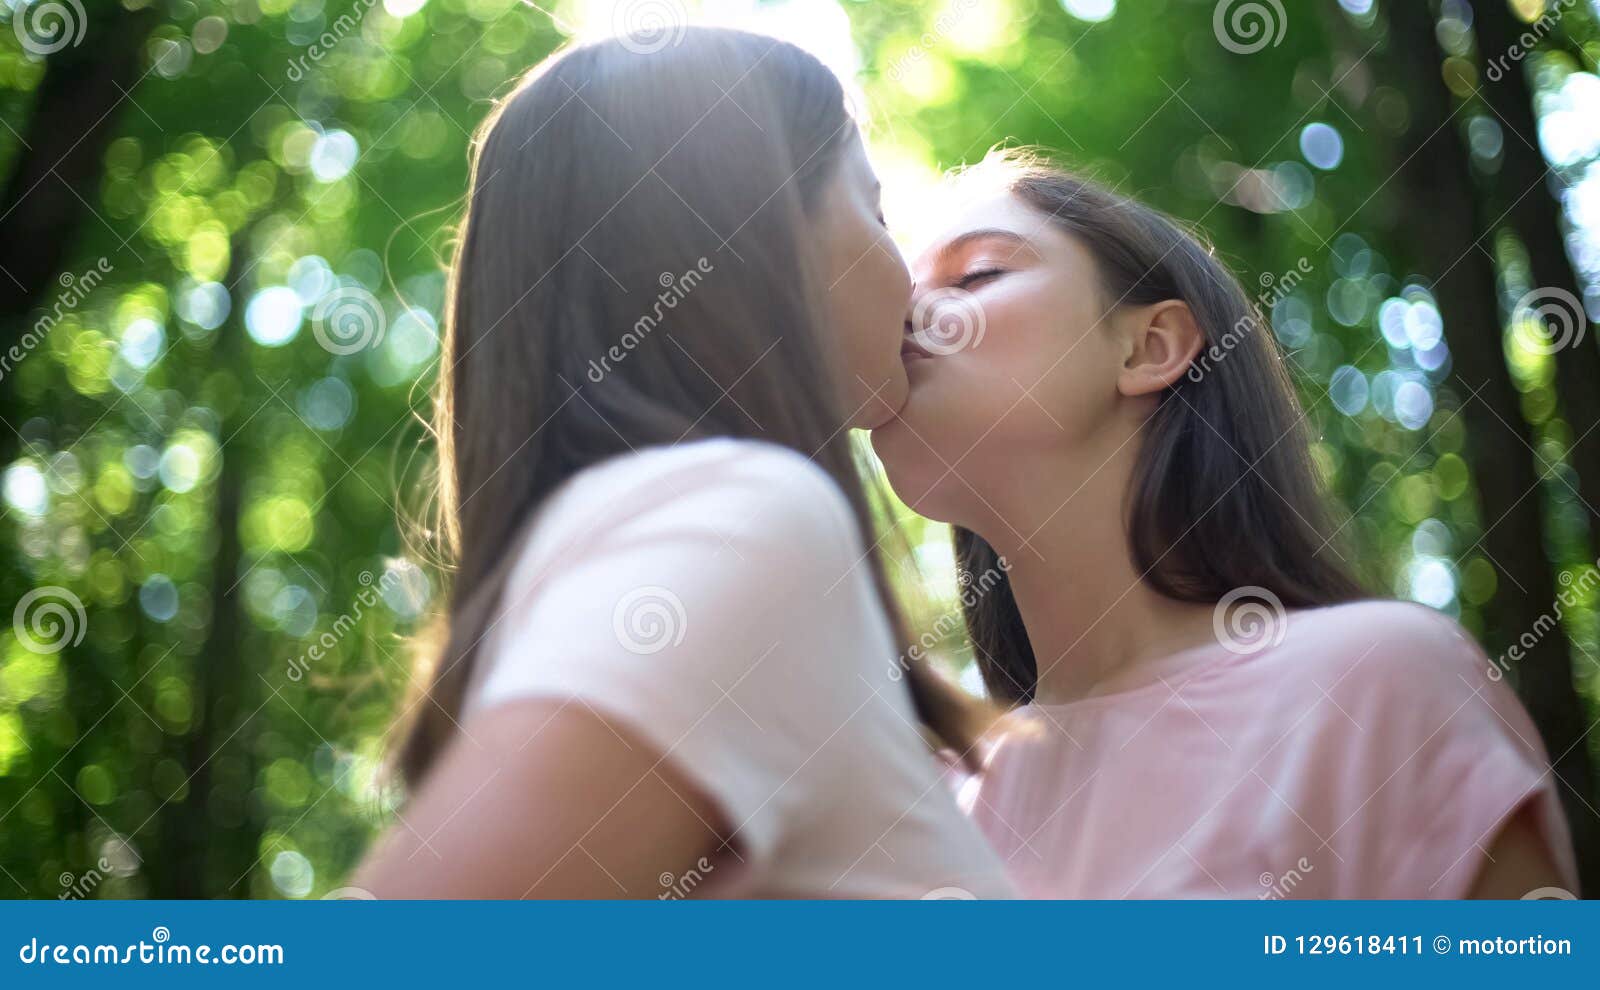 Lesbian Couple Kissing Passionately, Same Sex Marriage Happiness, Lgbt Rights Stock Image pic